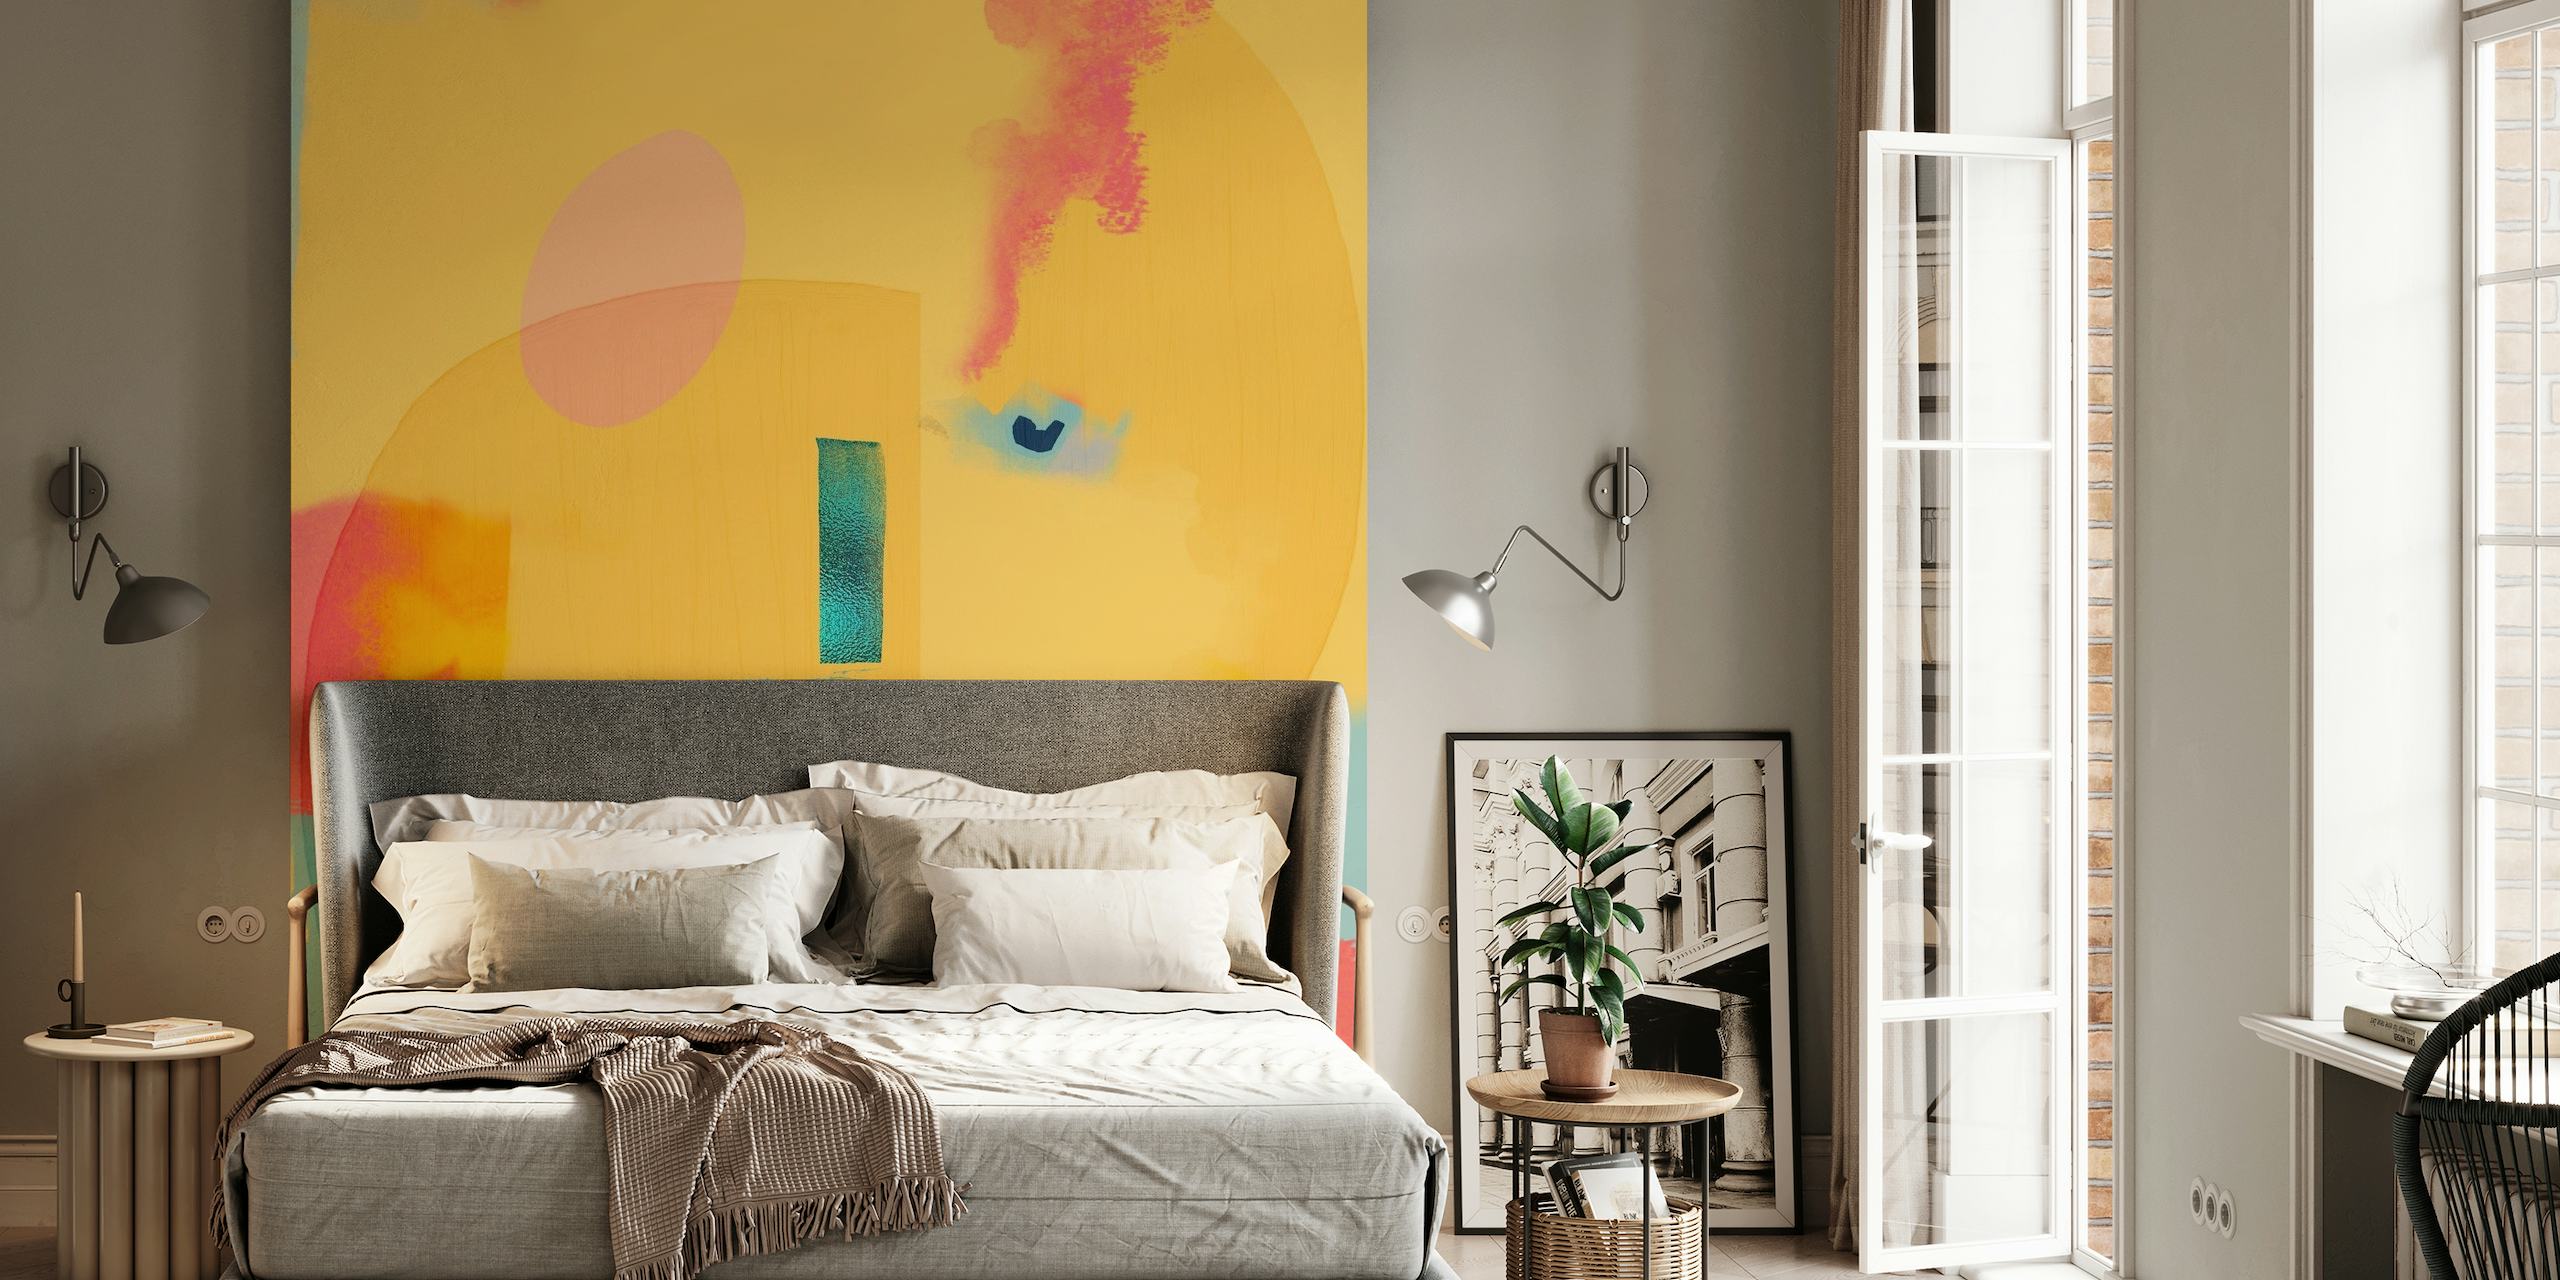 Abstract 'Motor Mouth' wall mural with vibrant splashes of color and playful shapes